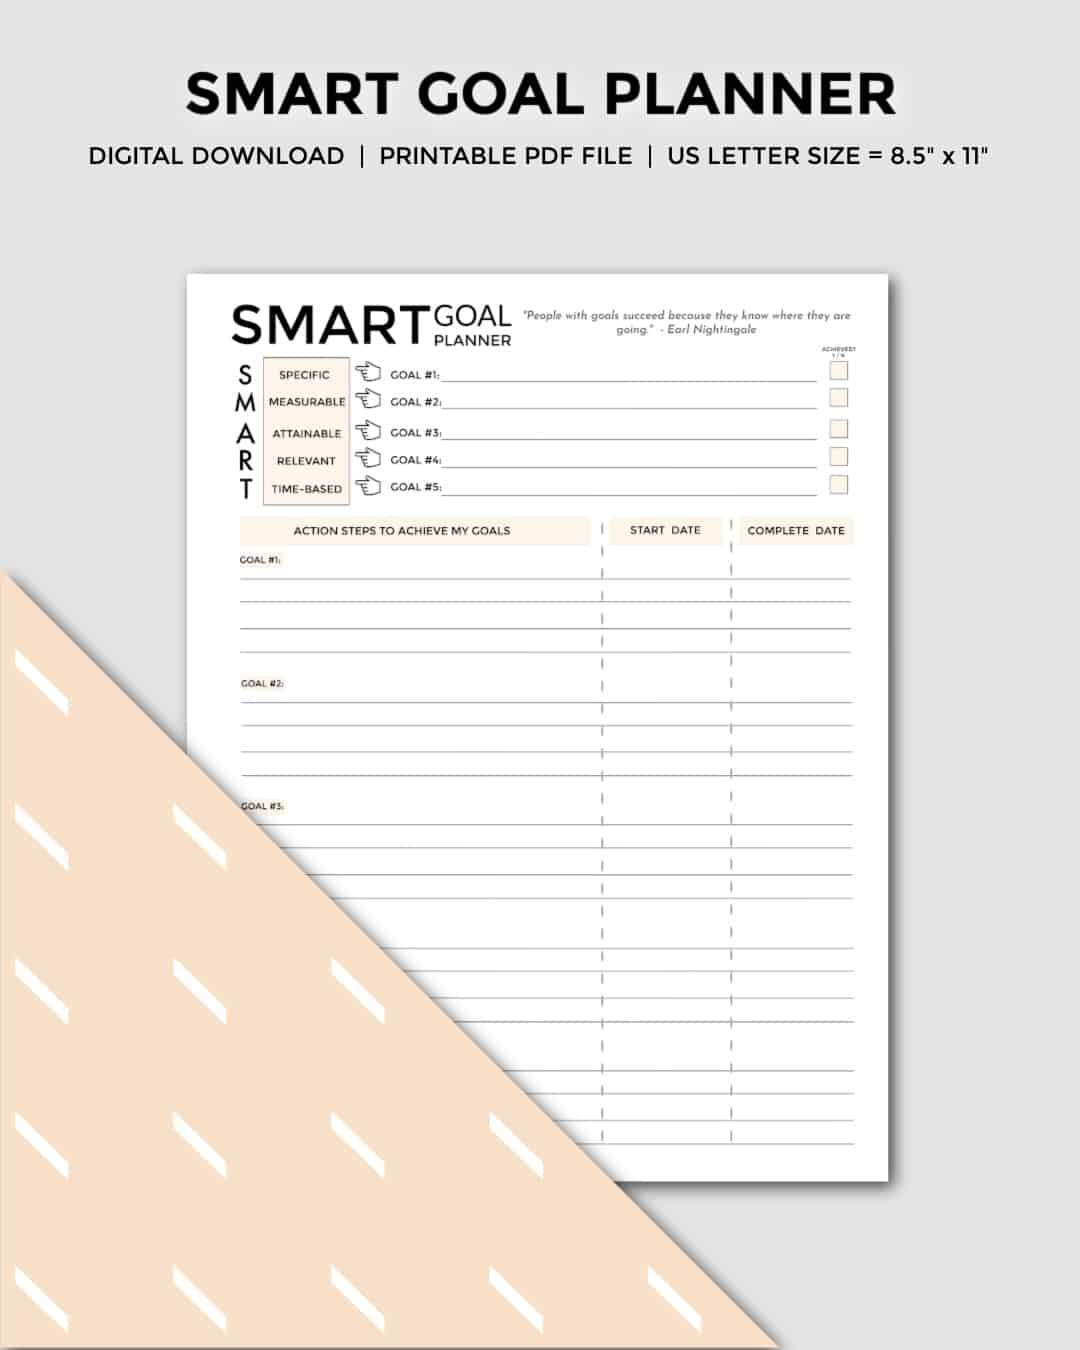 A SMART goal printable planner to help you know how to write SMART goals